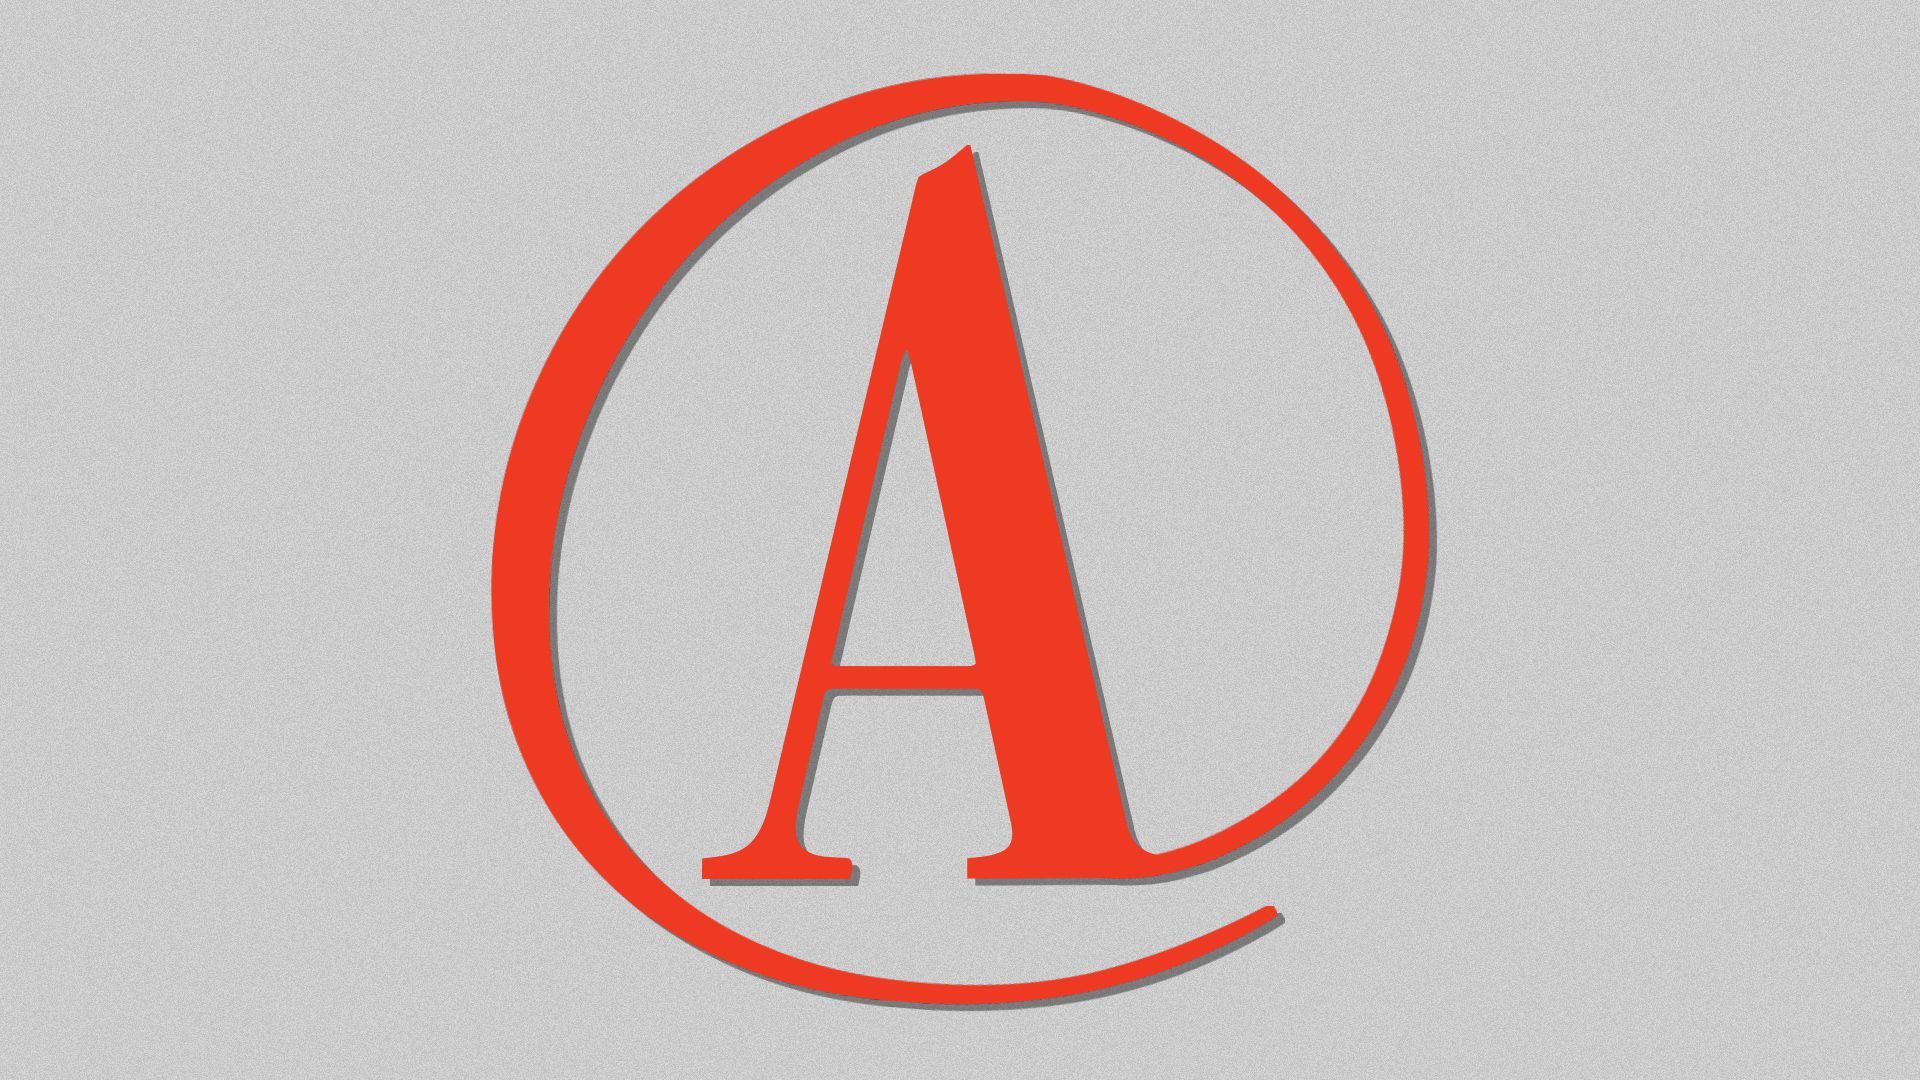 Illustration of The Atlantic "A" logo stylized as an "@" symbol.